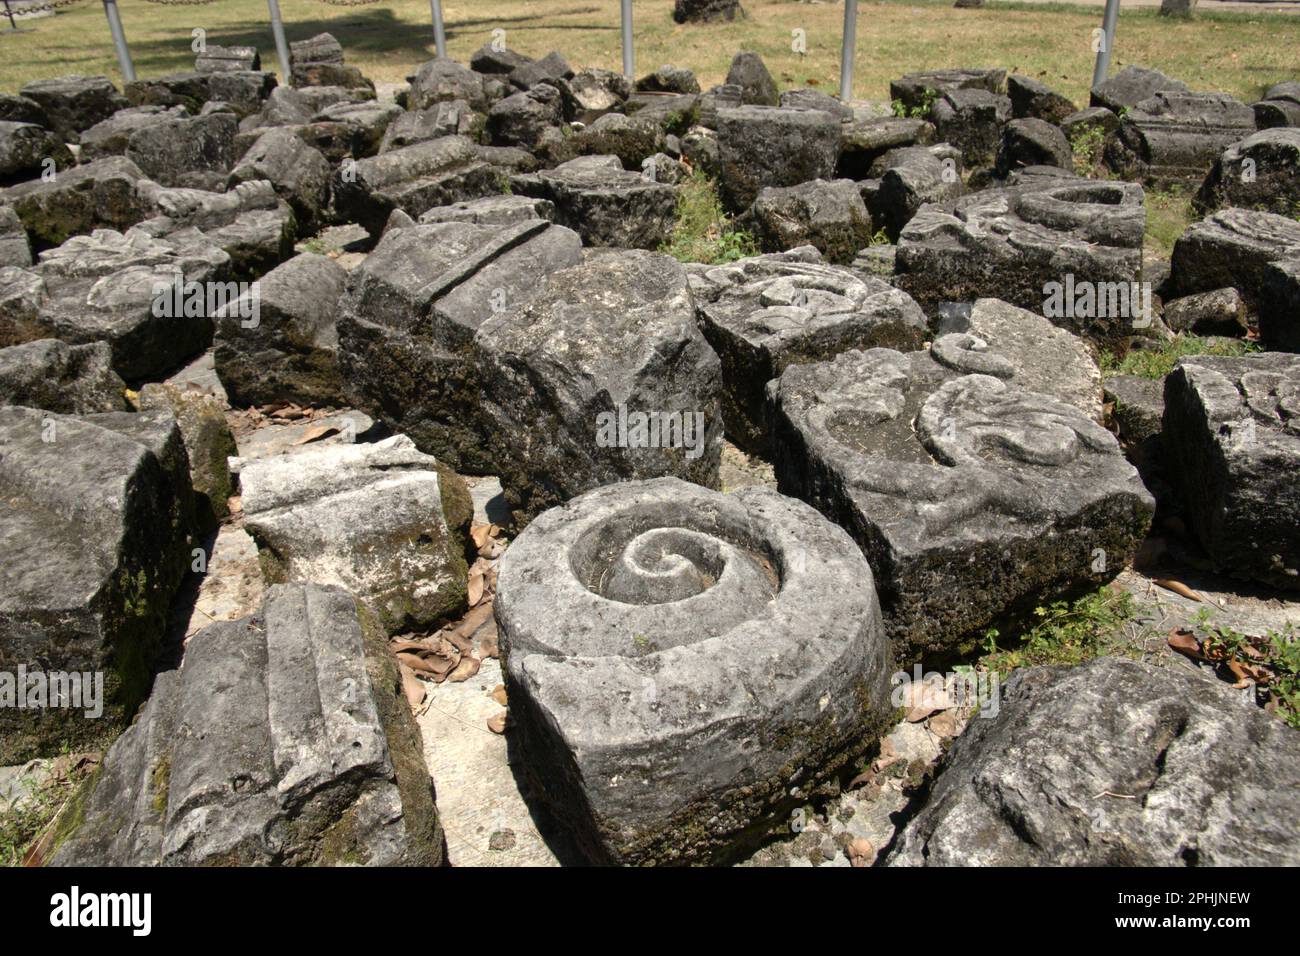 Pieces of stonecrafts in area now called Banten Lama (Old Banten) in Serang, Banten, Indonesia. 'The sustainability of cultural heritage is strongly linked to the effective participation of local communities in the conservation and management of these resources,' according to a team of scientists led by Sunday Oladipo Oladeji in their research article published on Sage Journals on October 28, 2022. Banten Lama (Old Banten) area was a part of the important port of Banten Sultanate, especially during the reign of Sultan Ageng Tirtayasa (1651-1683). Stock Photo